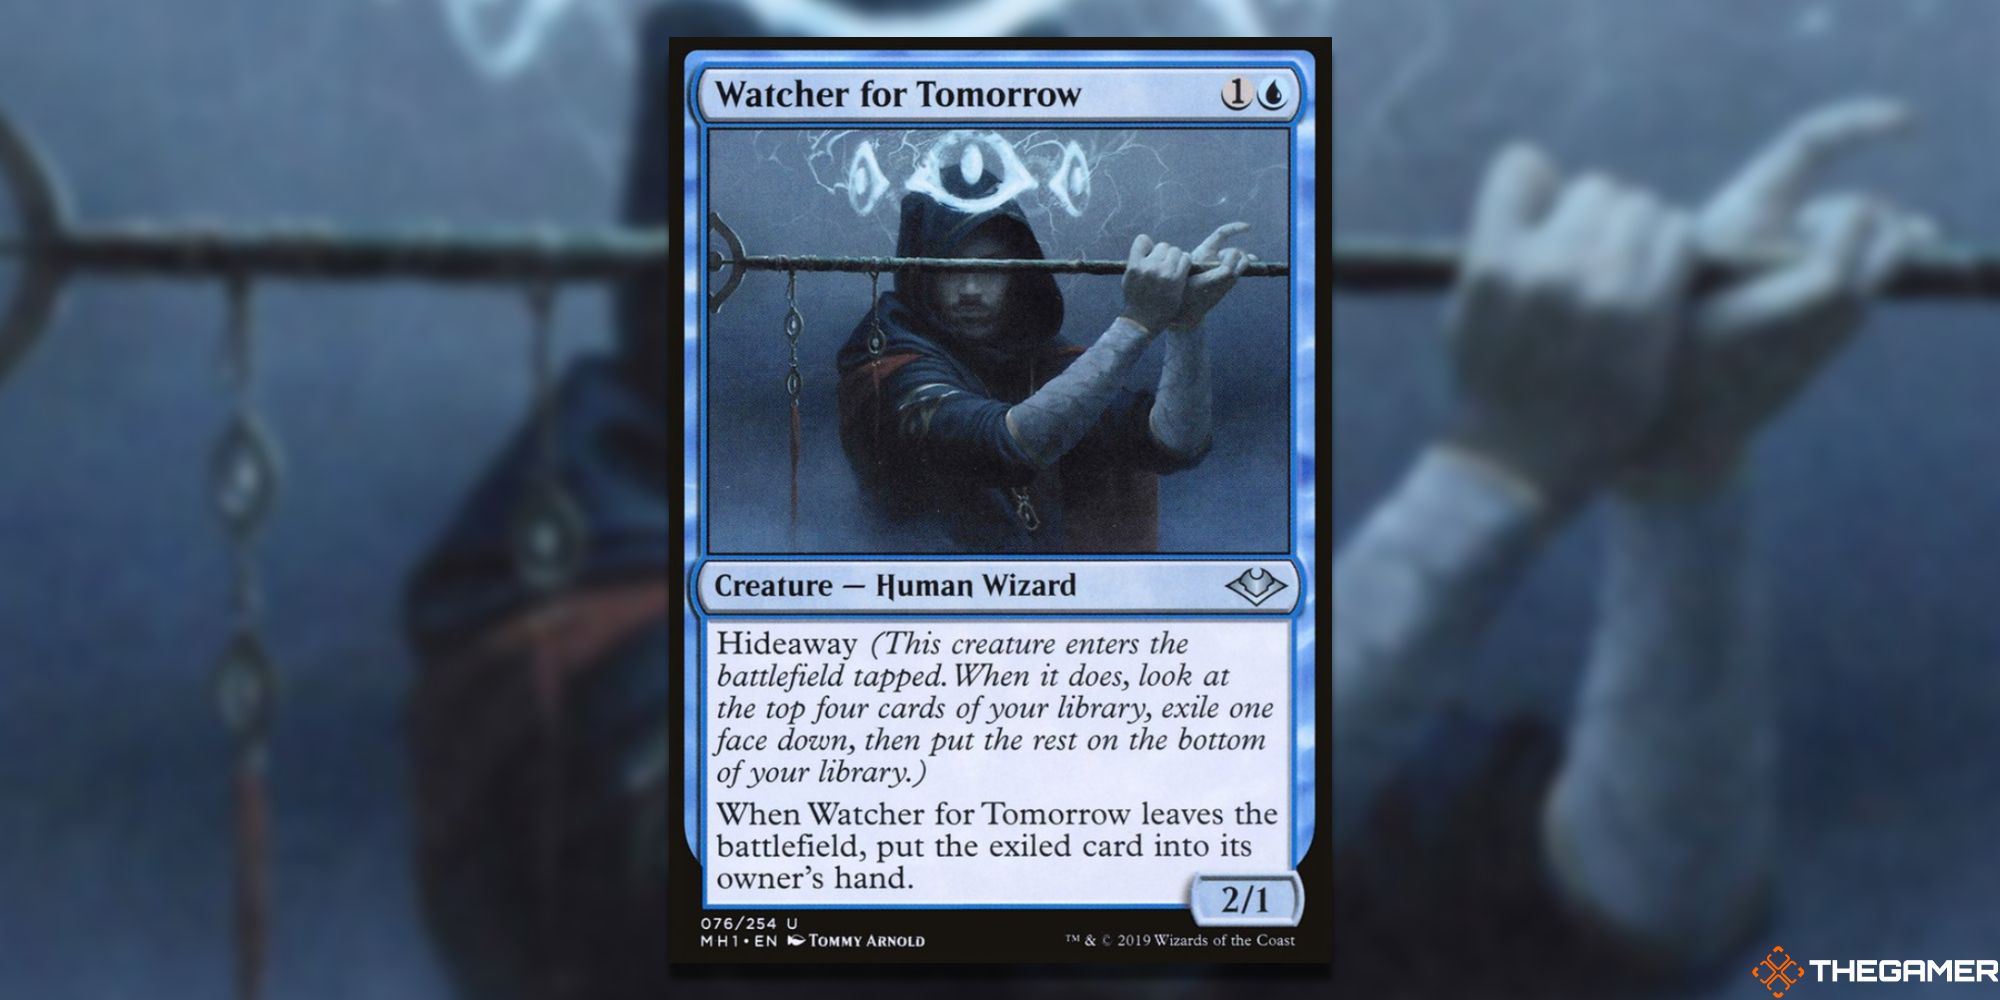 Watcher for Tomorrow full card with background